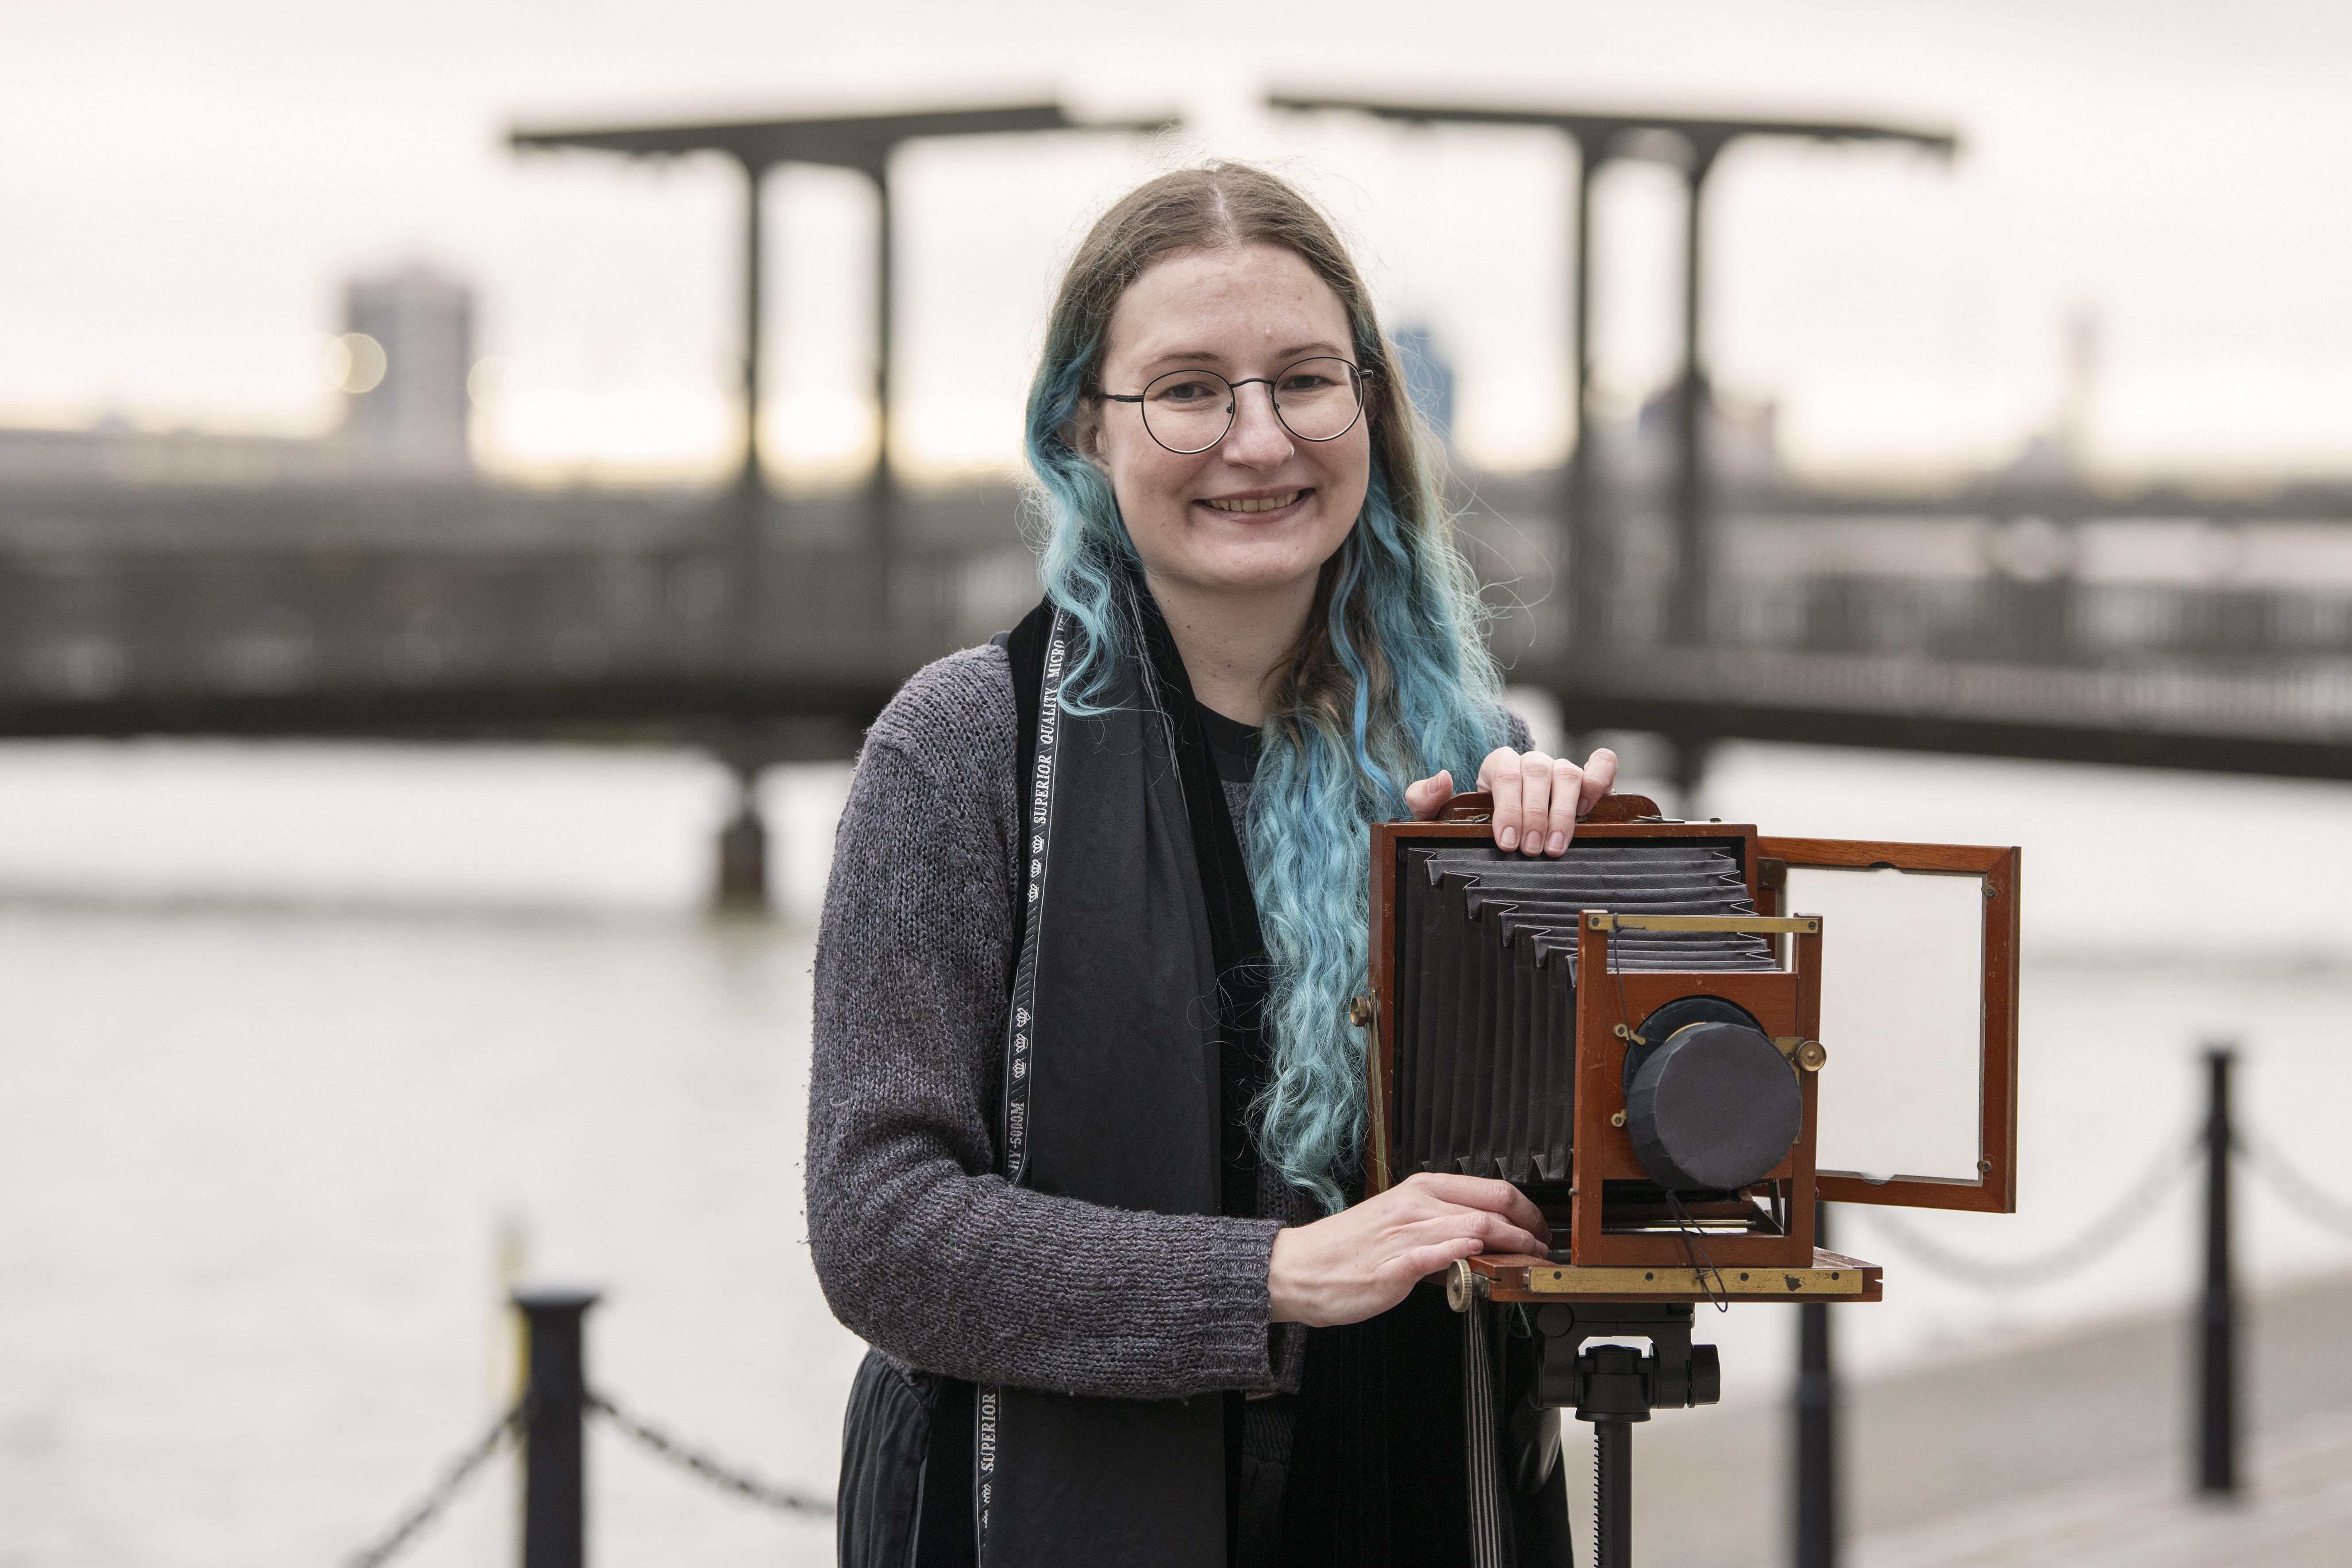 Woman by dock edge with antique camera